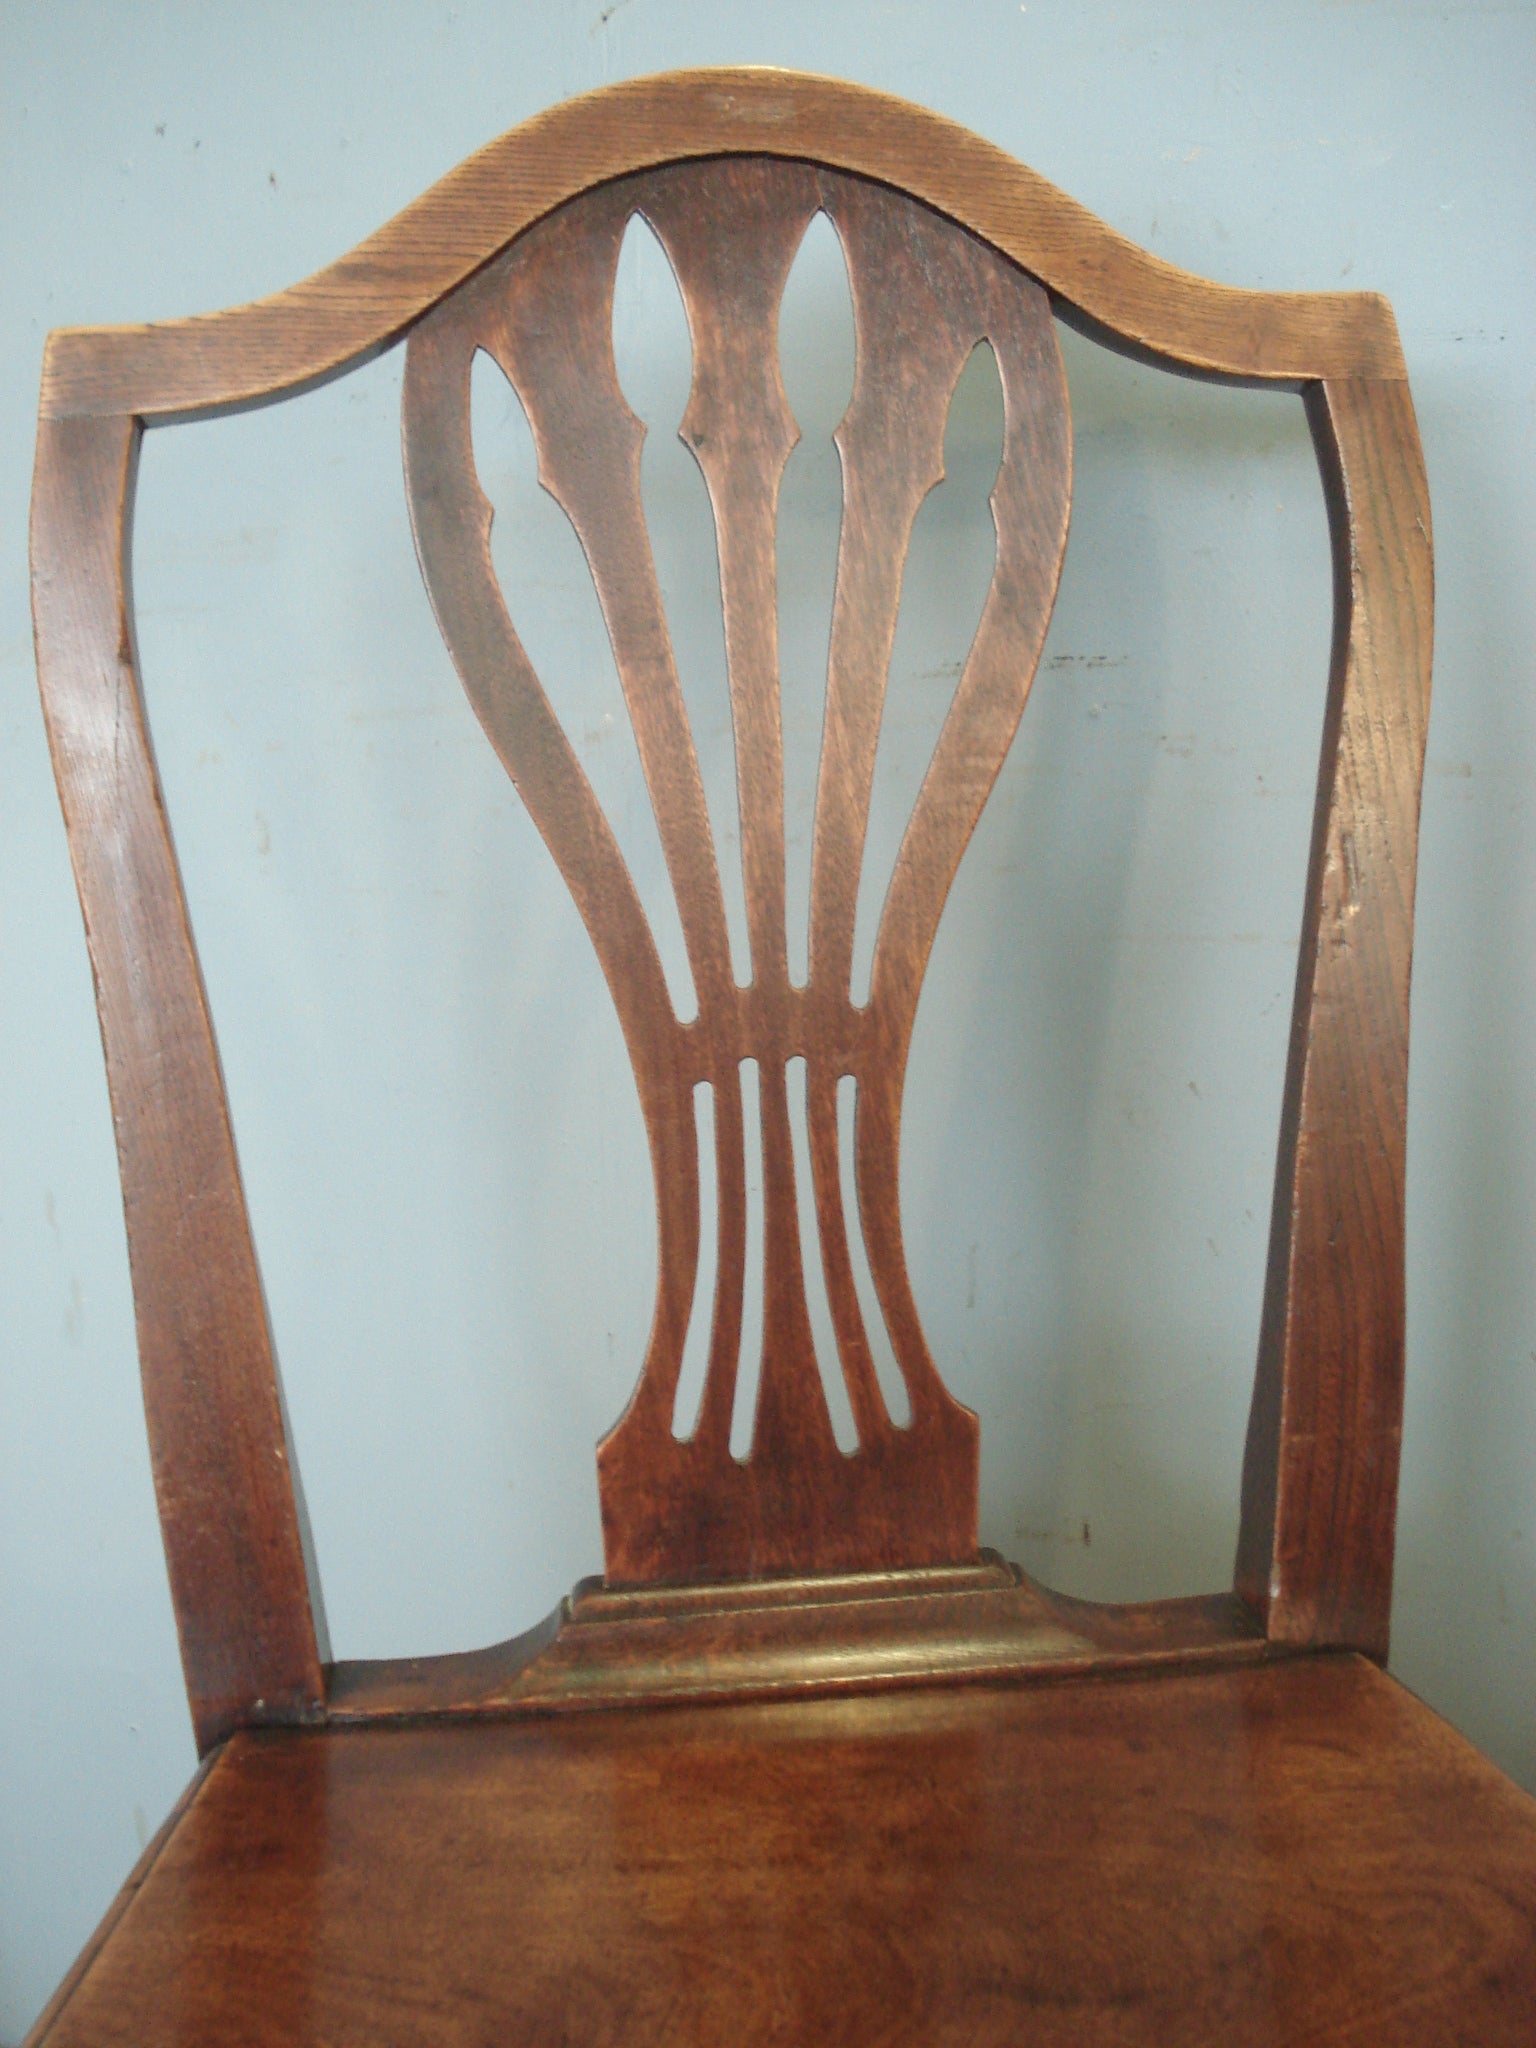 Elegant Pair of Early C19th Hall chairs